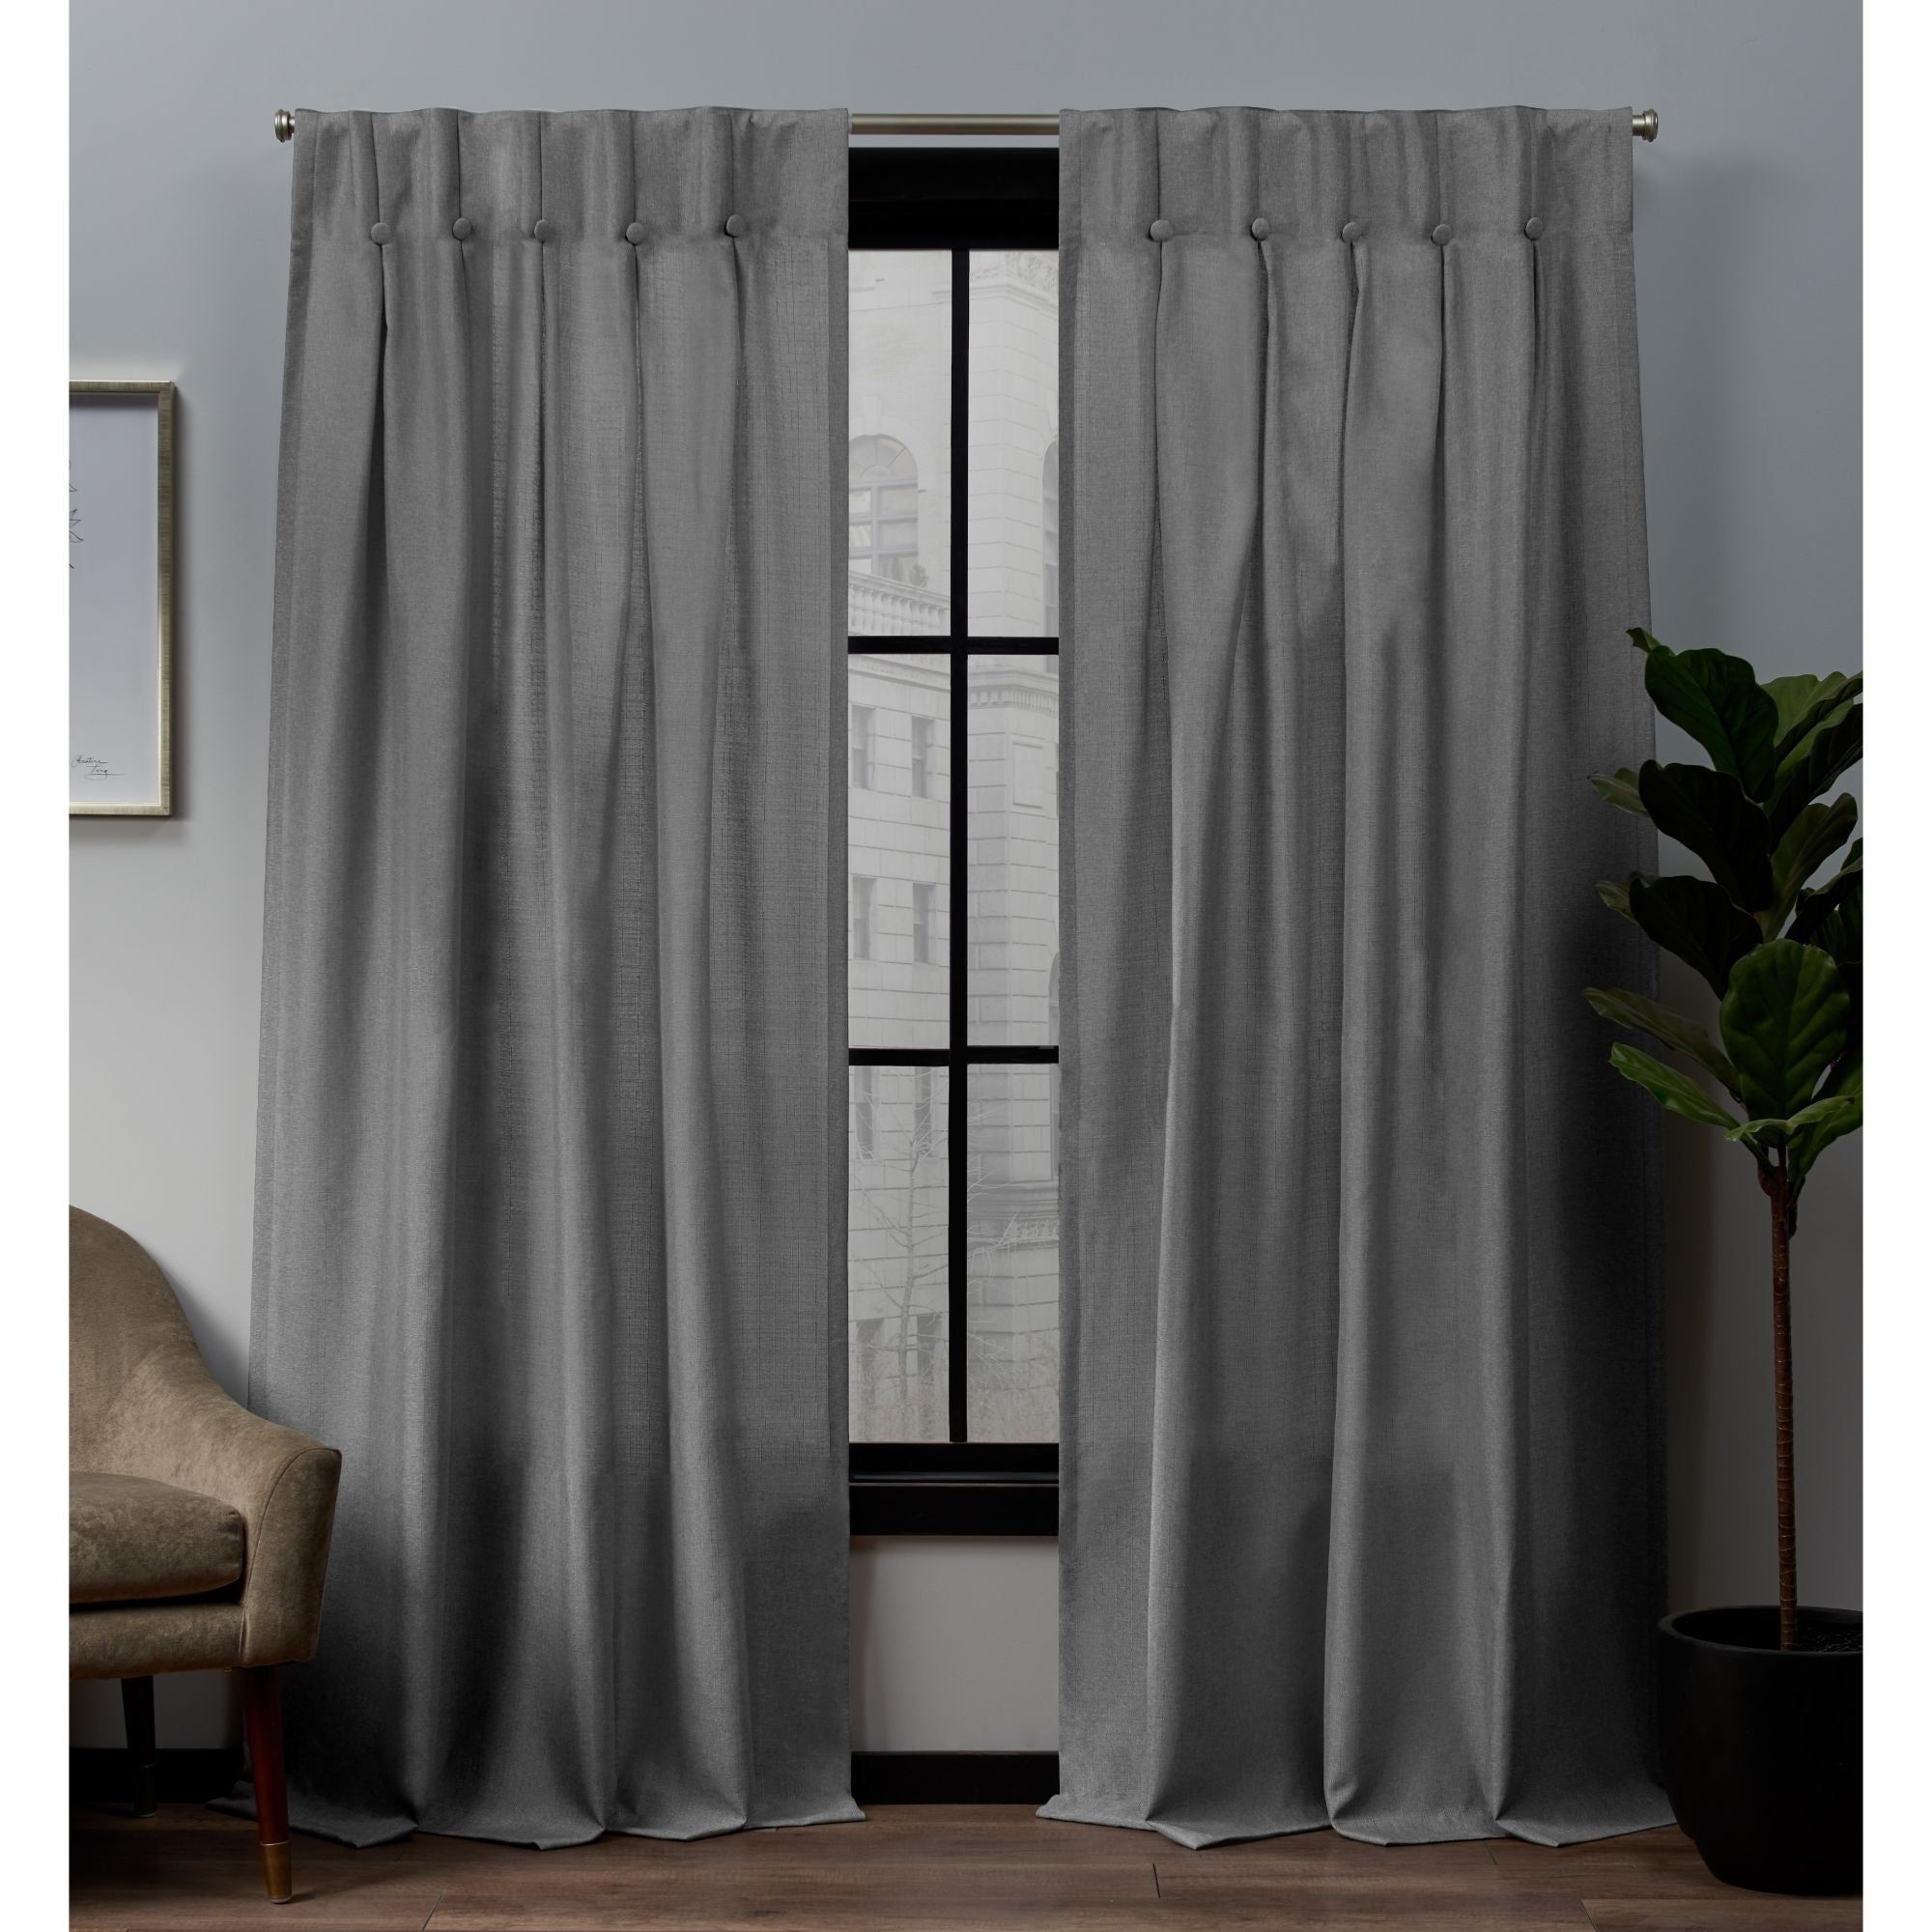 Details About Copper Grove Popovo Linen Button Top Window Curtain Panel For Copper Grove Fulgence Faux Silk Grommet Top Panel Curtains (View 13 of 20)